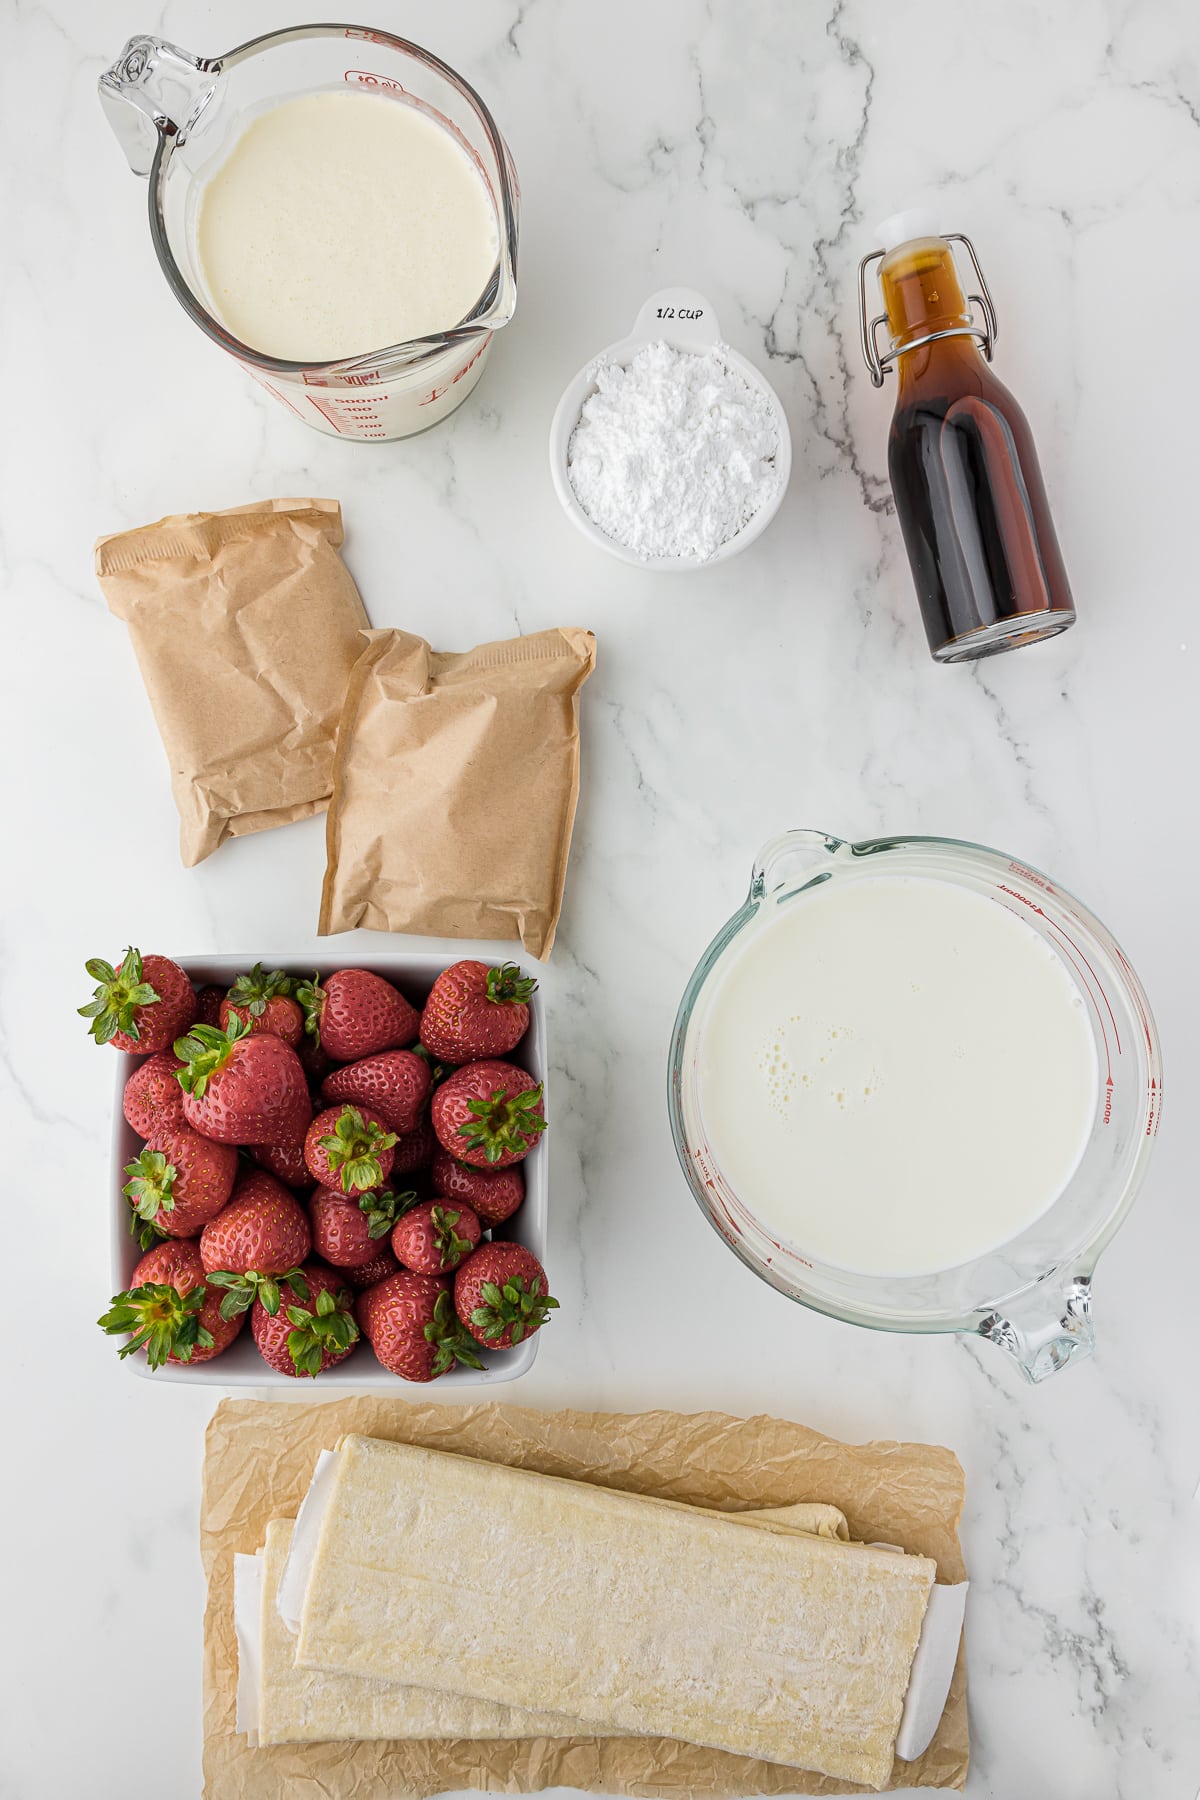 Ingredients for making Strawberry Napoleons all laid out on a white marble countertop